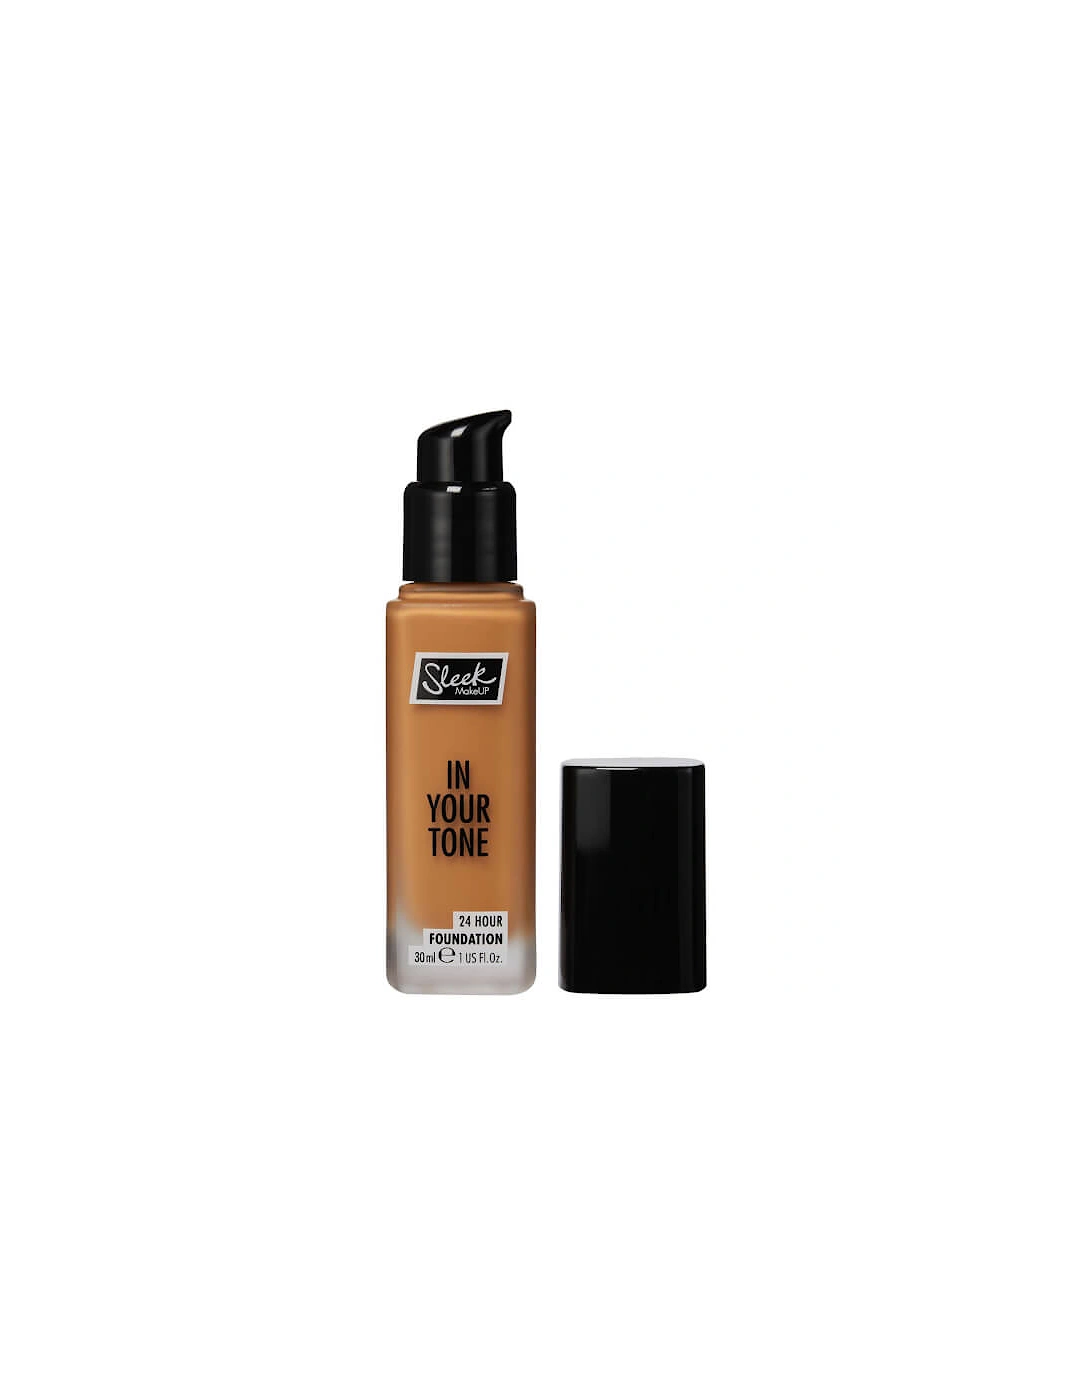 in Your Tone 24 Hour Foundation - 8N, 2 of 1